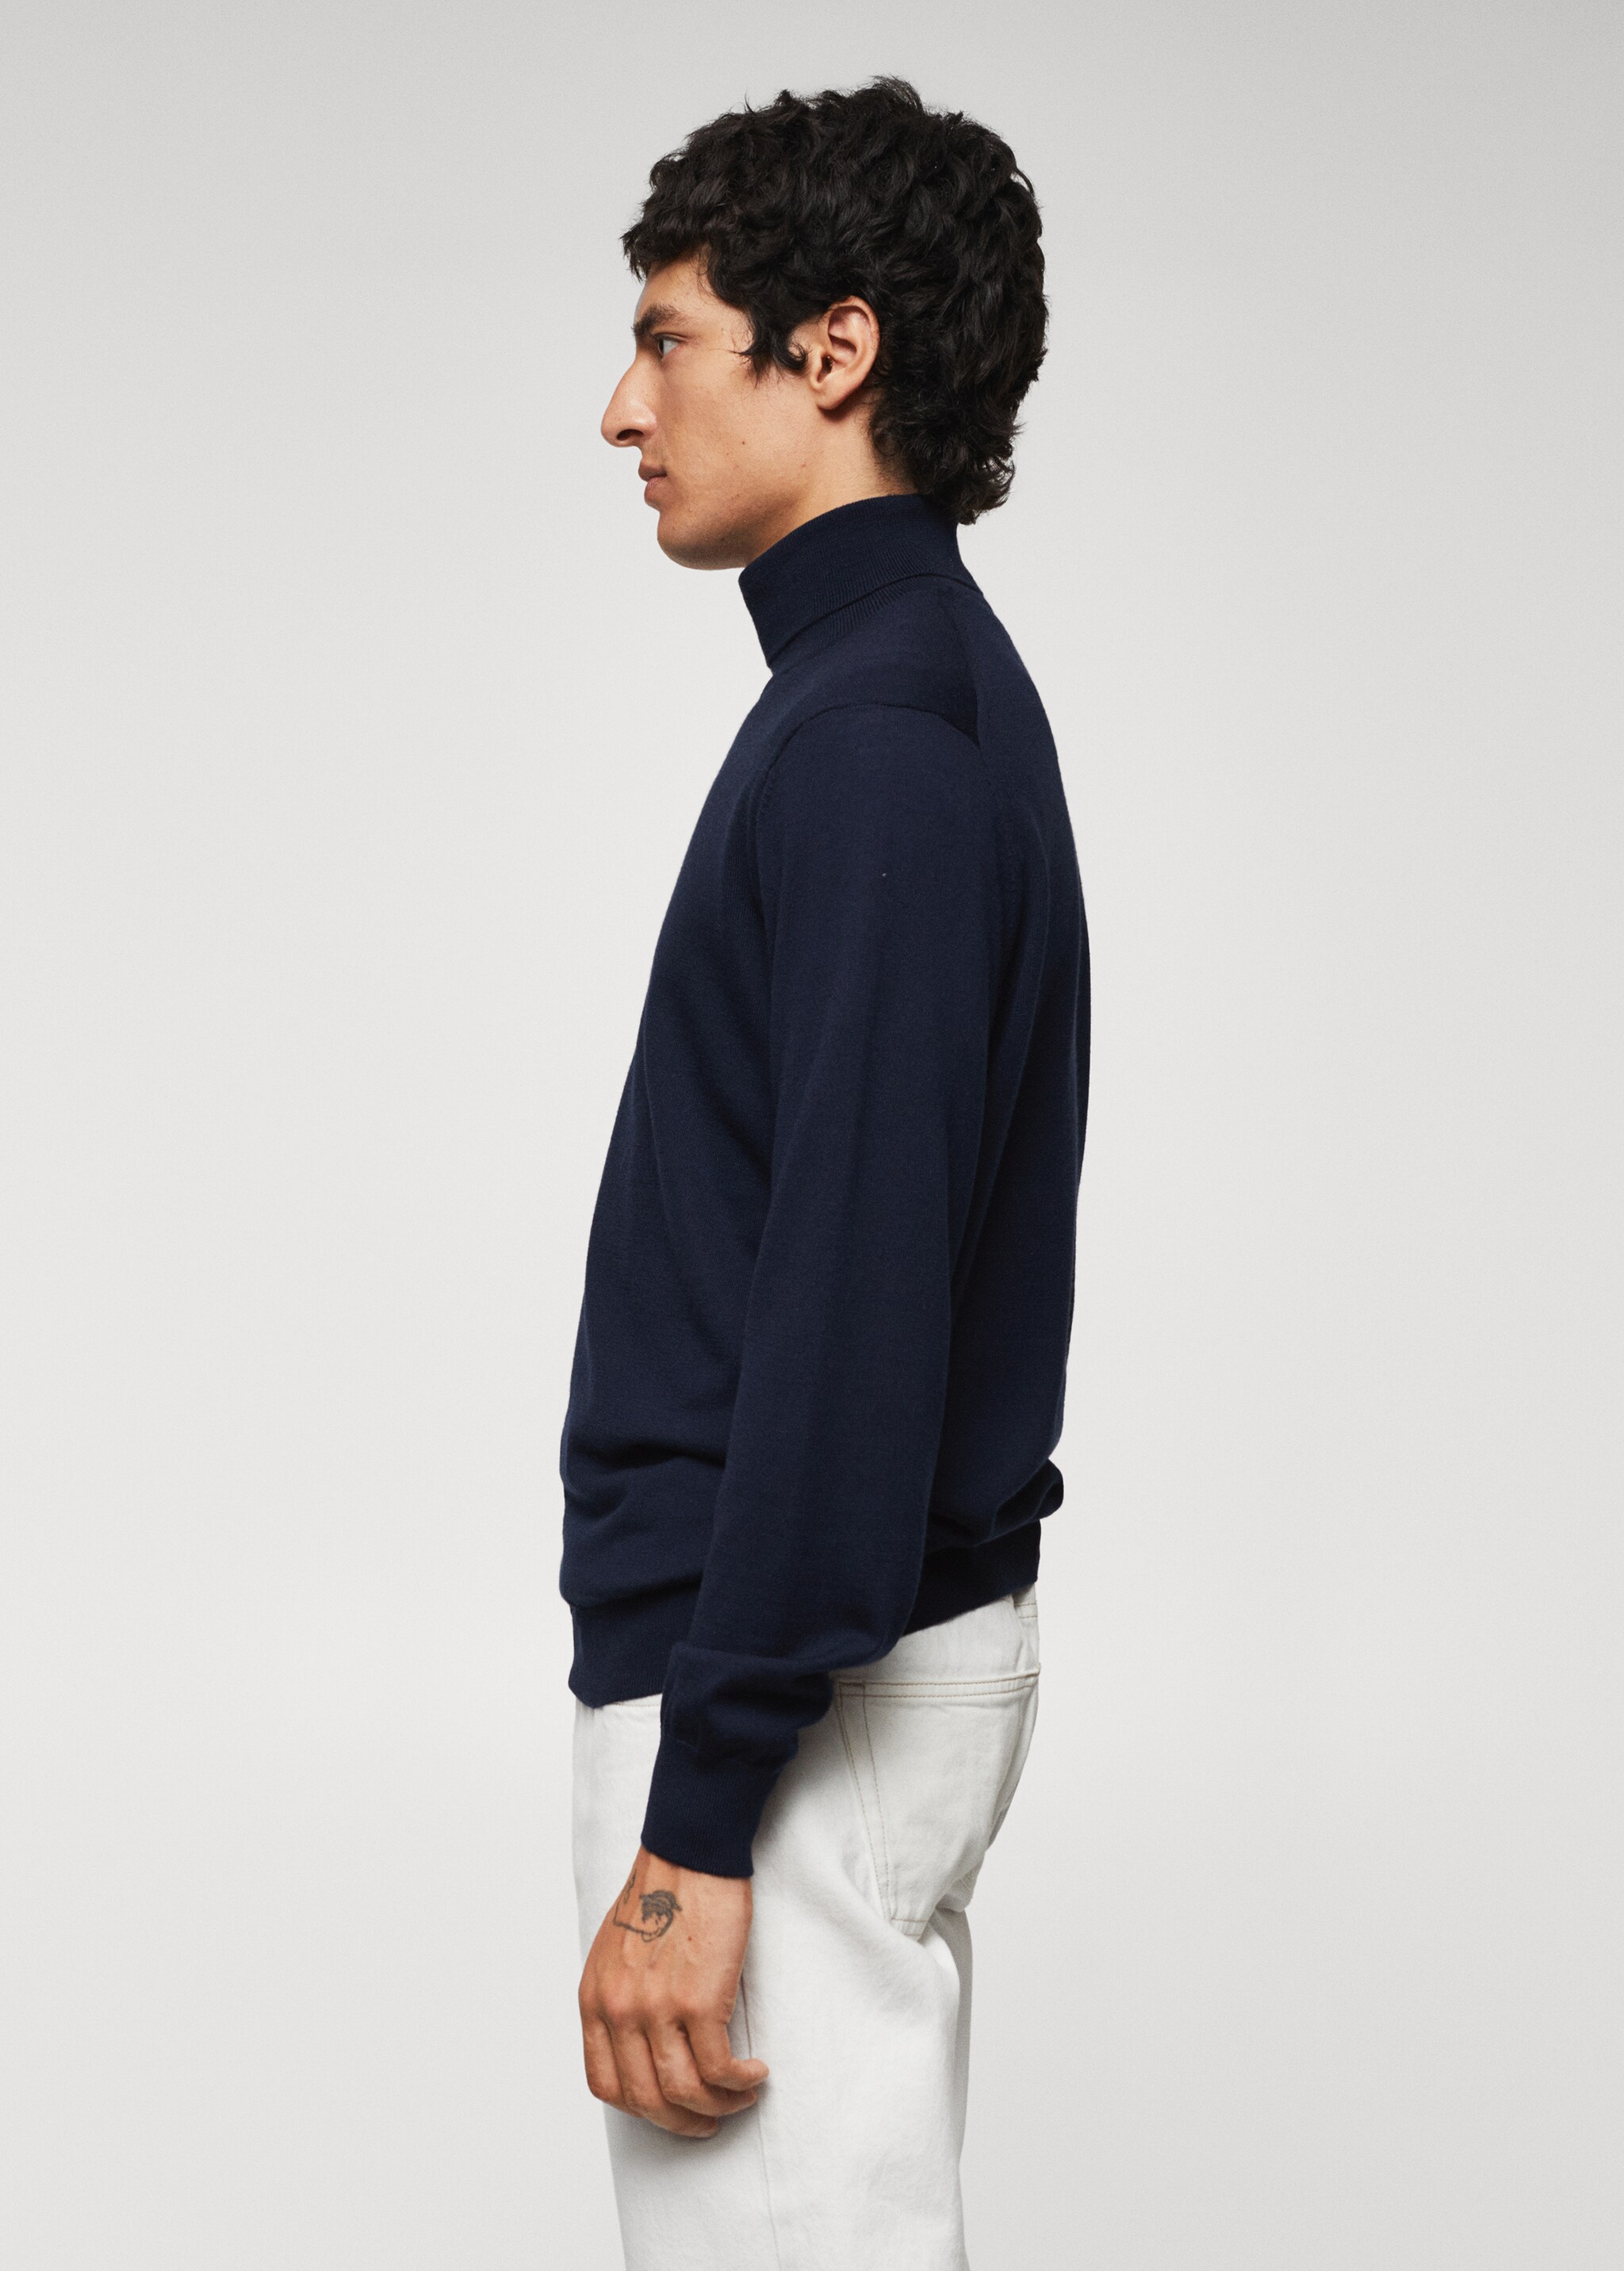 100% merino wool sweater - Details of the article 6